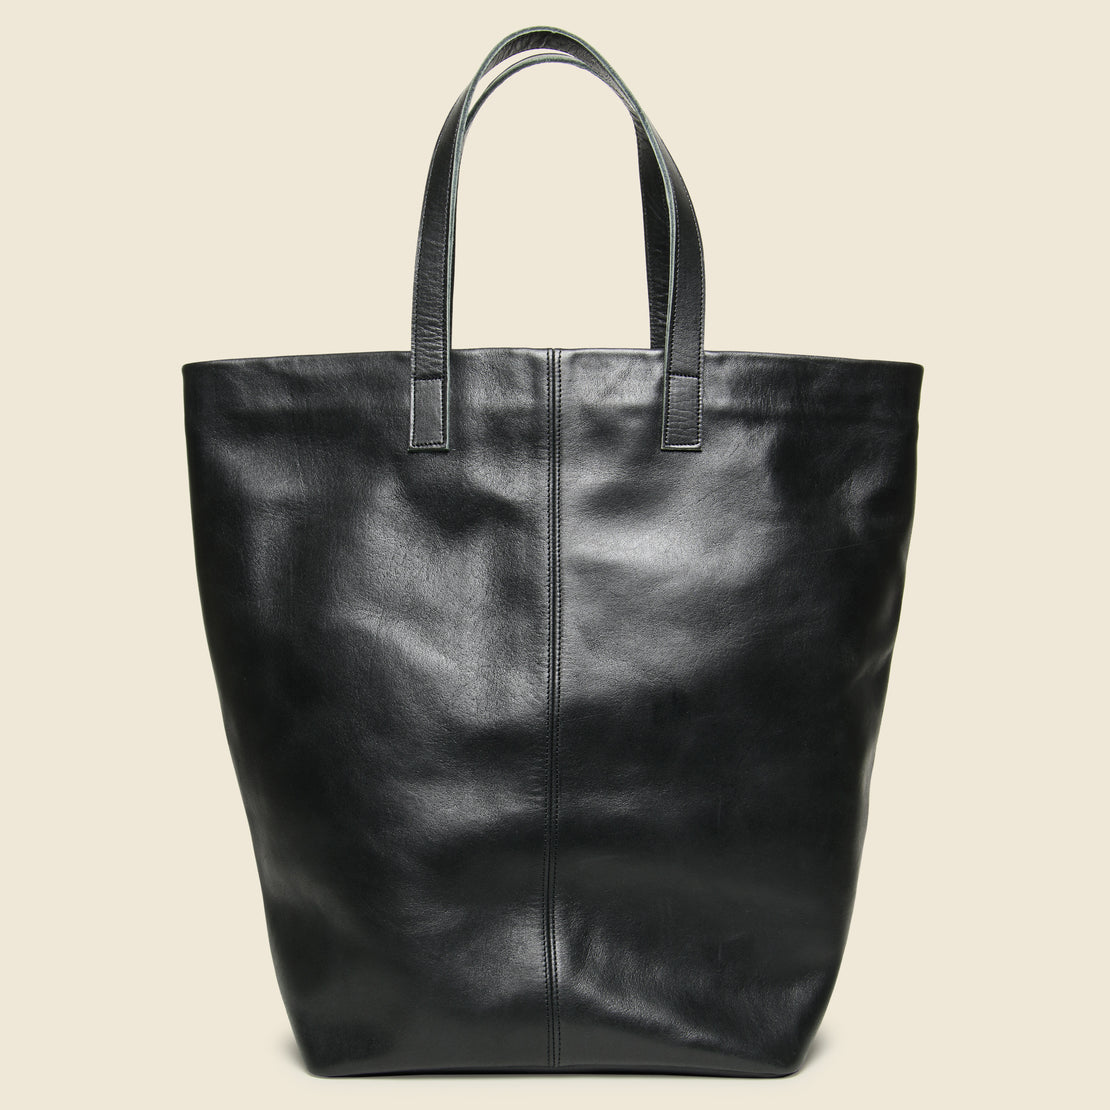 Barracas Leather Tote Bag - Black - Nimes - STAG Provisions - W - Accessories - Bag